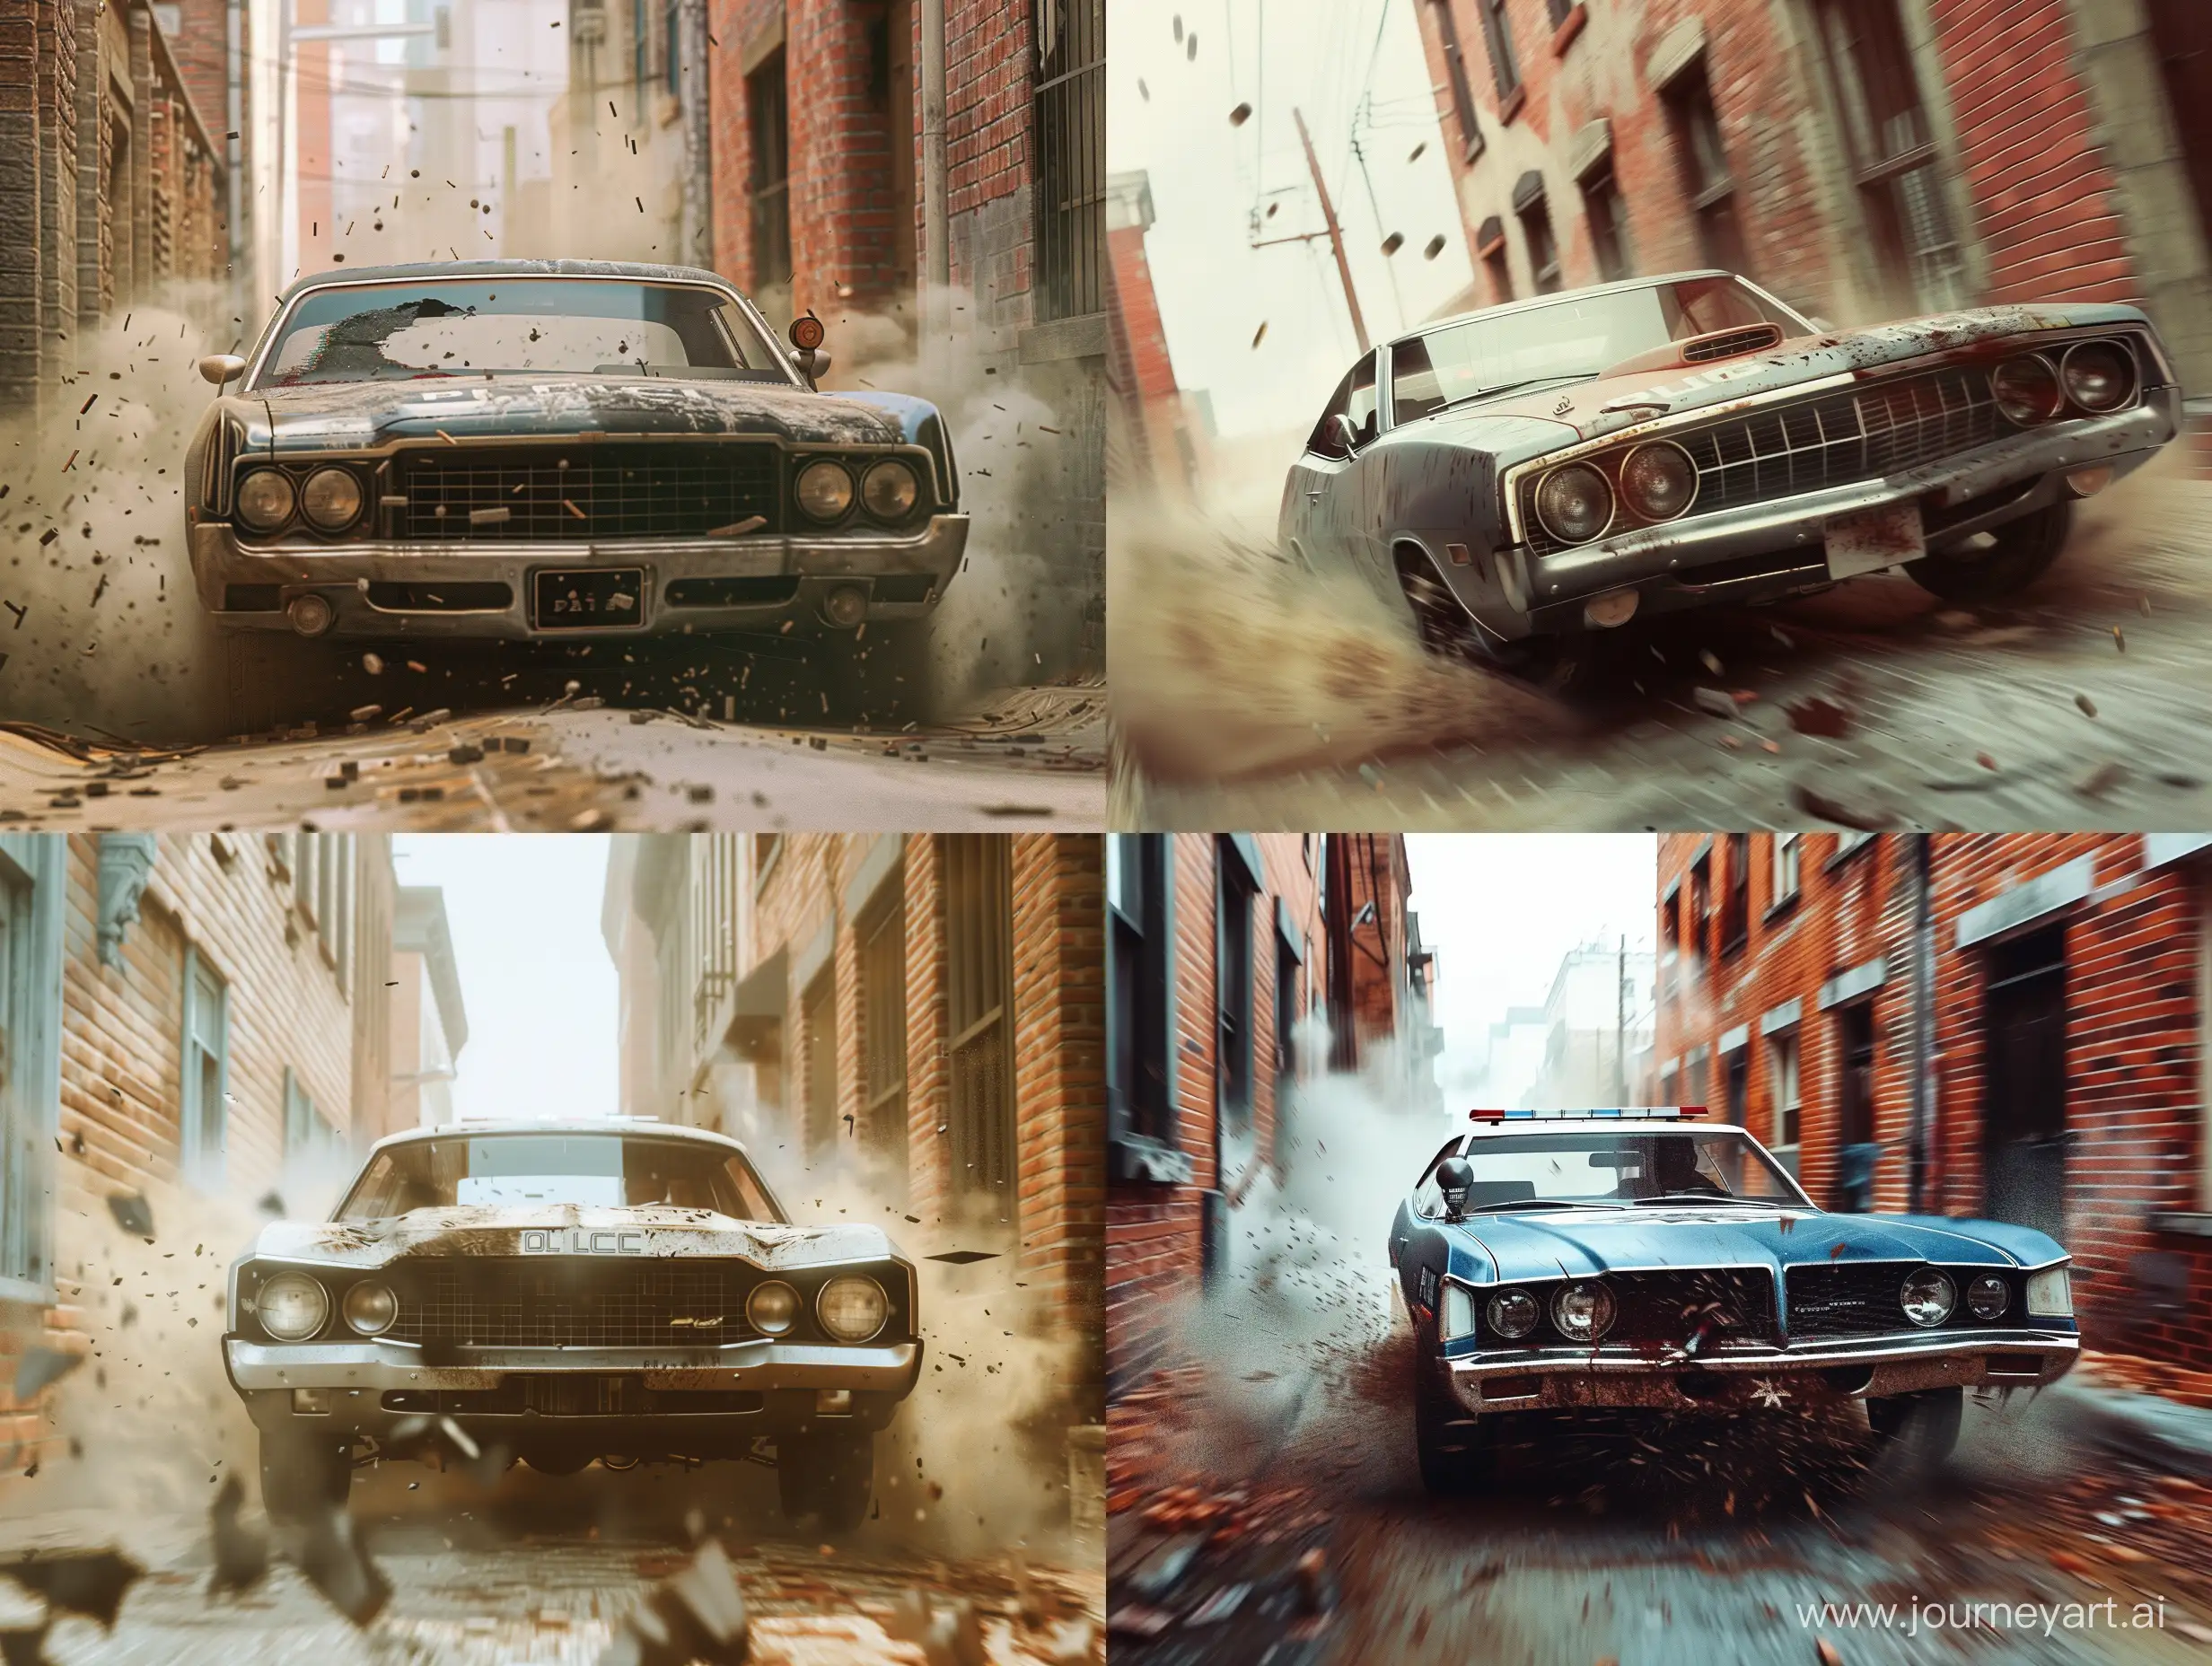 Photorealism, Retro, 1970s, America, Chase Scene, Vintage Police Car, Battered Body, Bullet Tracks, Sense of Speed, Blur, Alley, Brick Buildings, Debris in the Air, Dust in the Air, Cinematic Camera Angle, Color Grading